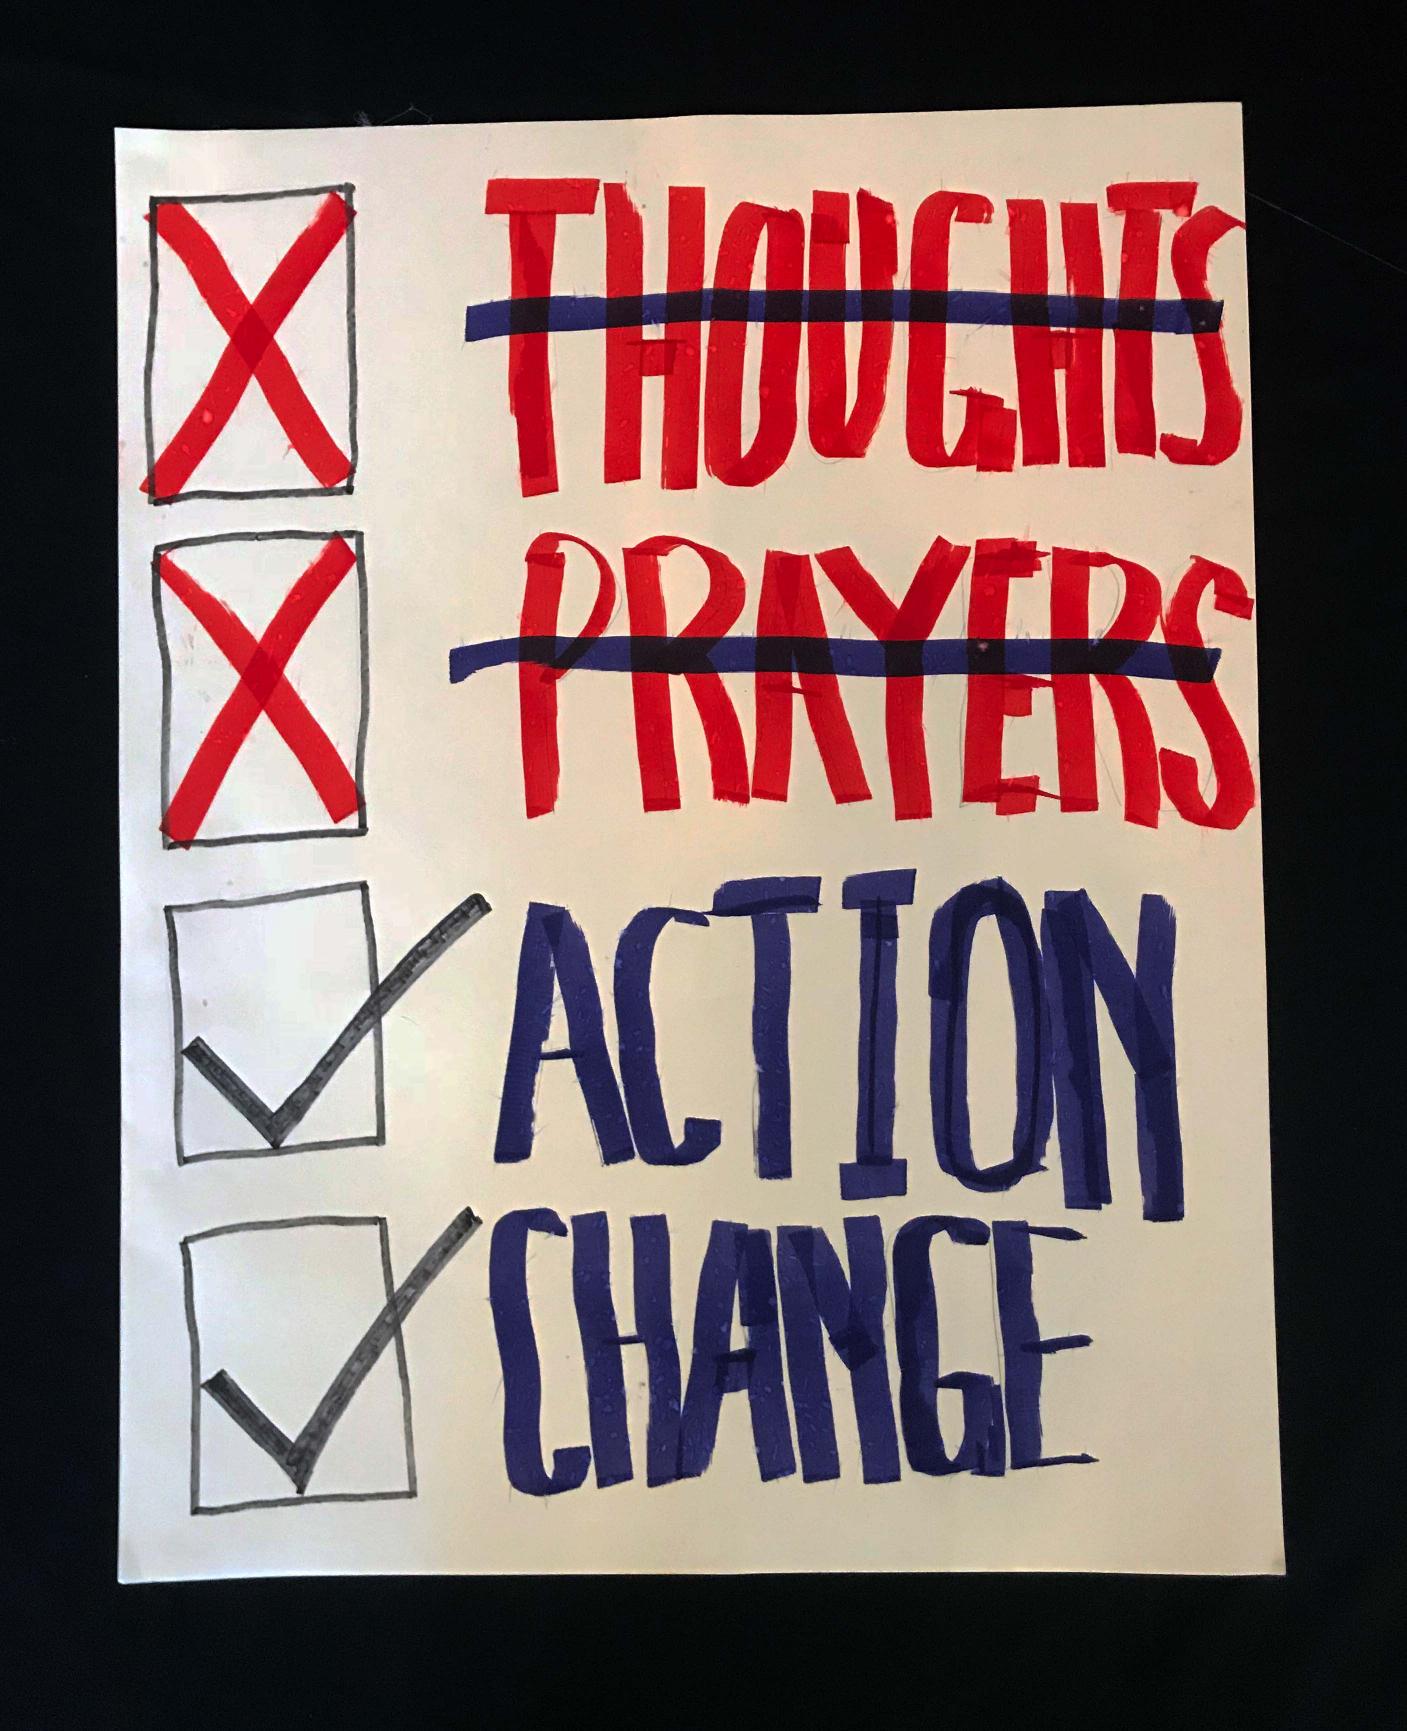 Charlotte March for Our Lives, 2018. Sign reads: "[Not] Thoughts [Not] Prayers [Yes] Action [Yes] Change"